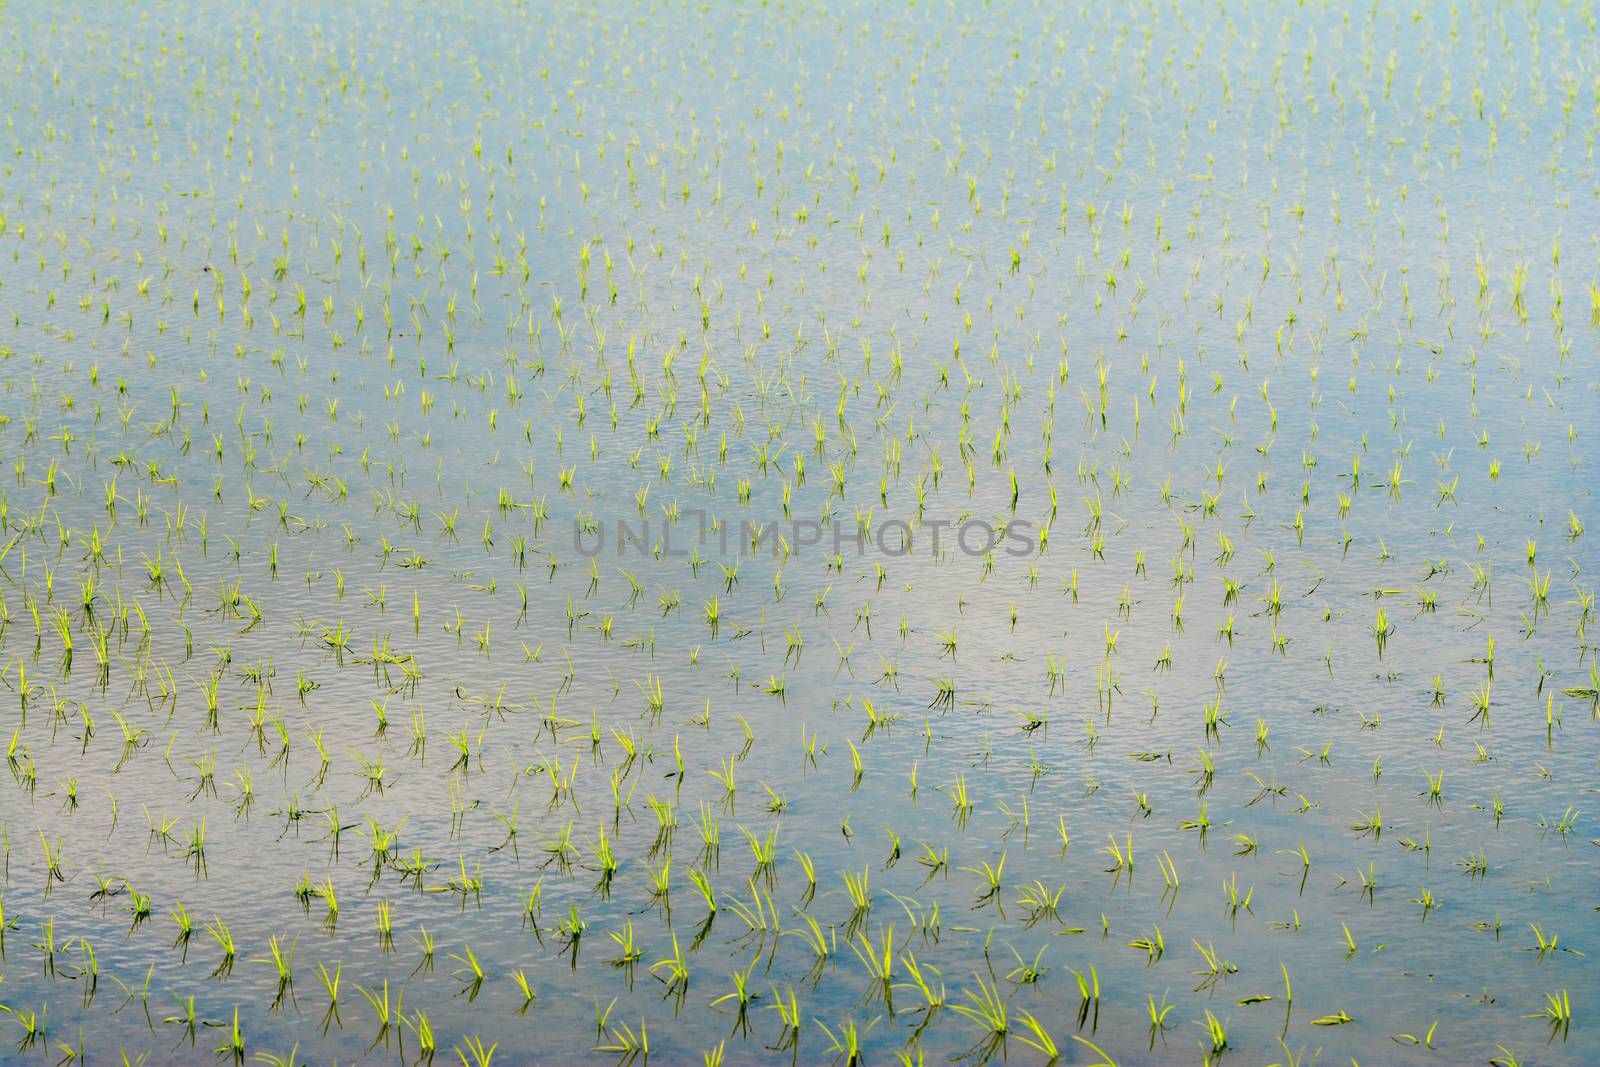 Rows of newly planted rice with the blue sky and clouds reflected in the water.